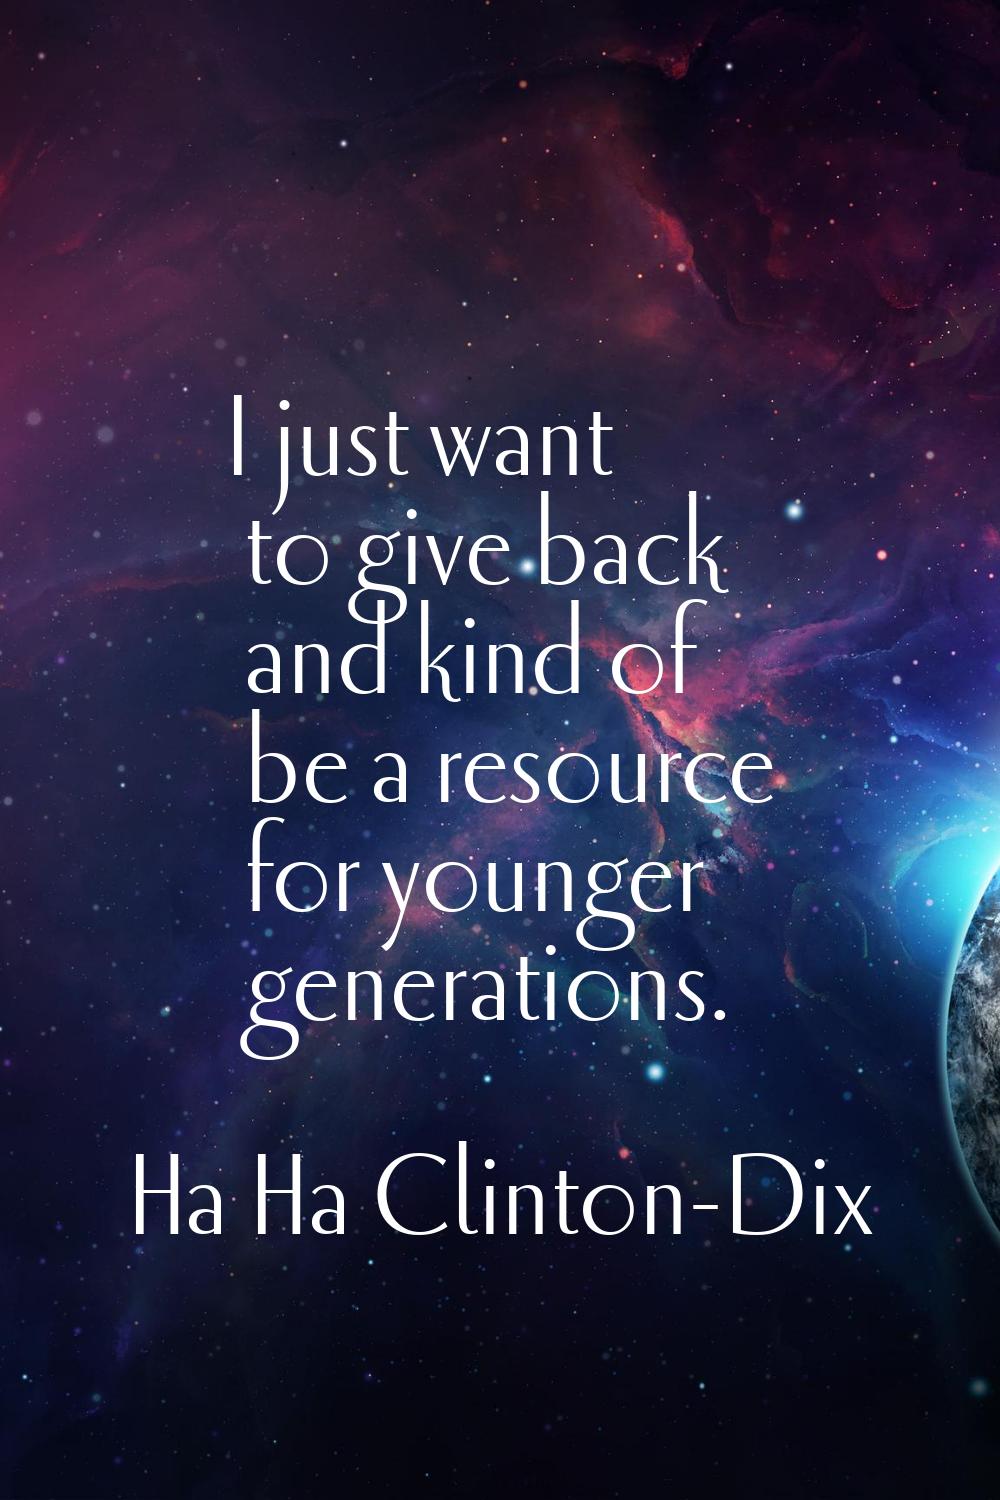 I just want to give back and kind of be a resource for younger generations.